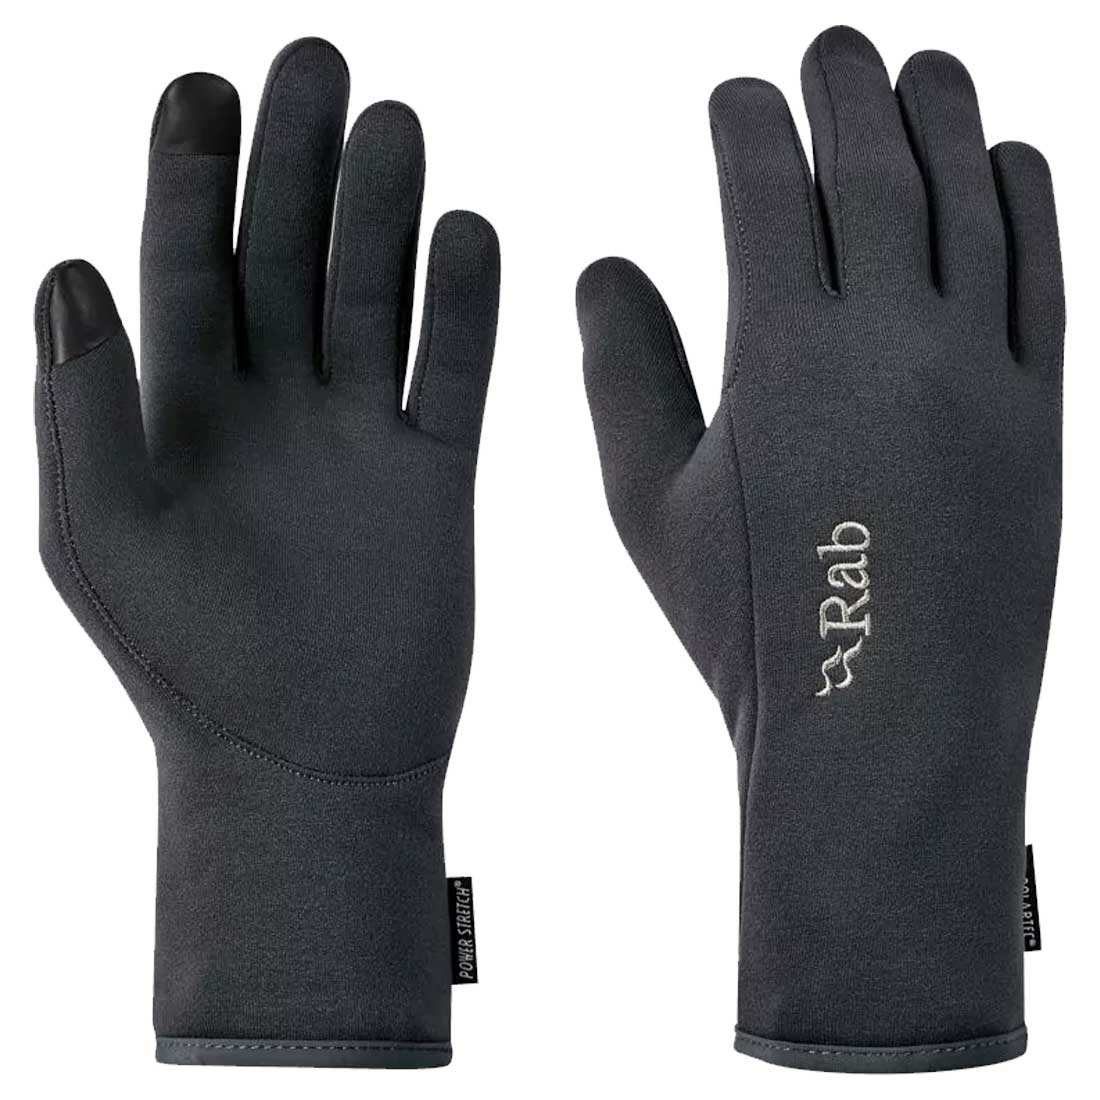 Rab Power Stretch Contact Glove - Men's